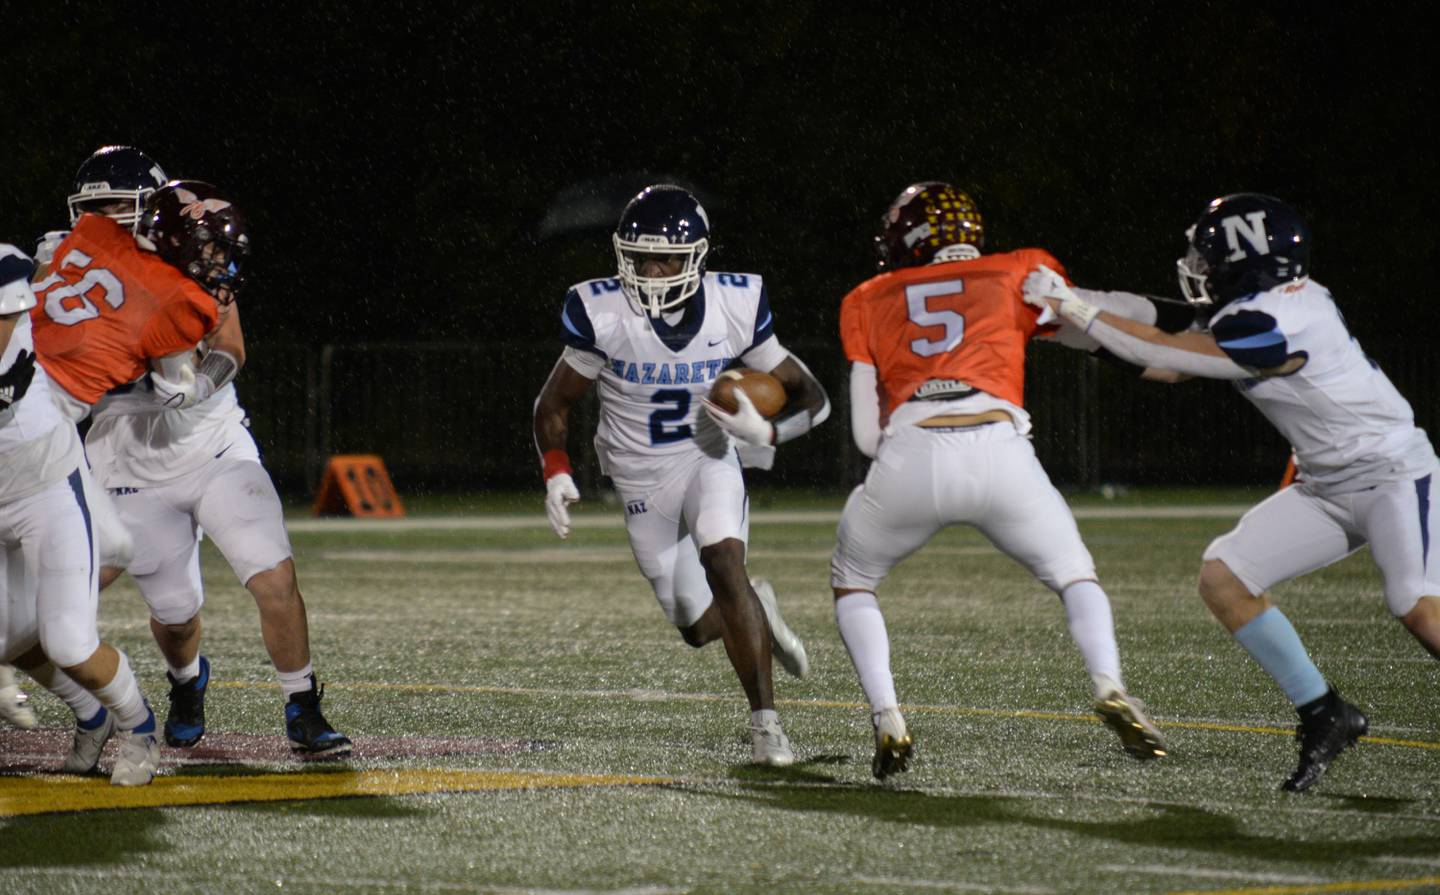 Nazareth's Justin Taylor runs the field during their game against Montini Friday Oct 14, 2022.